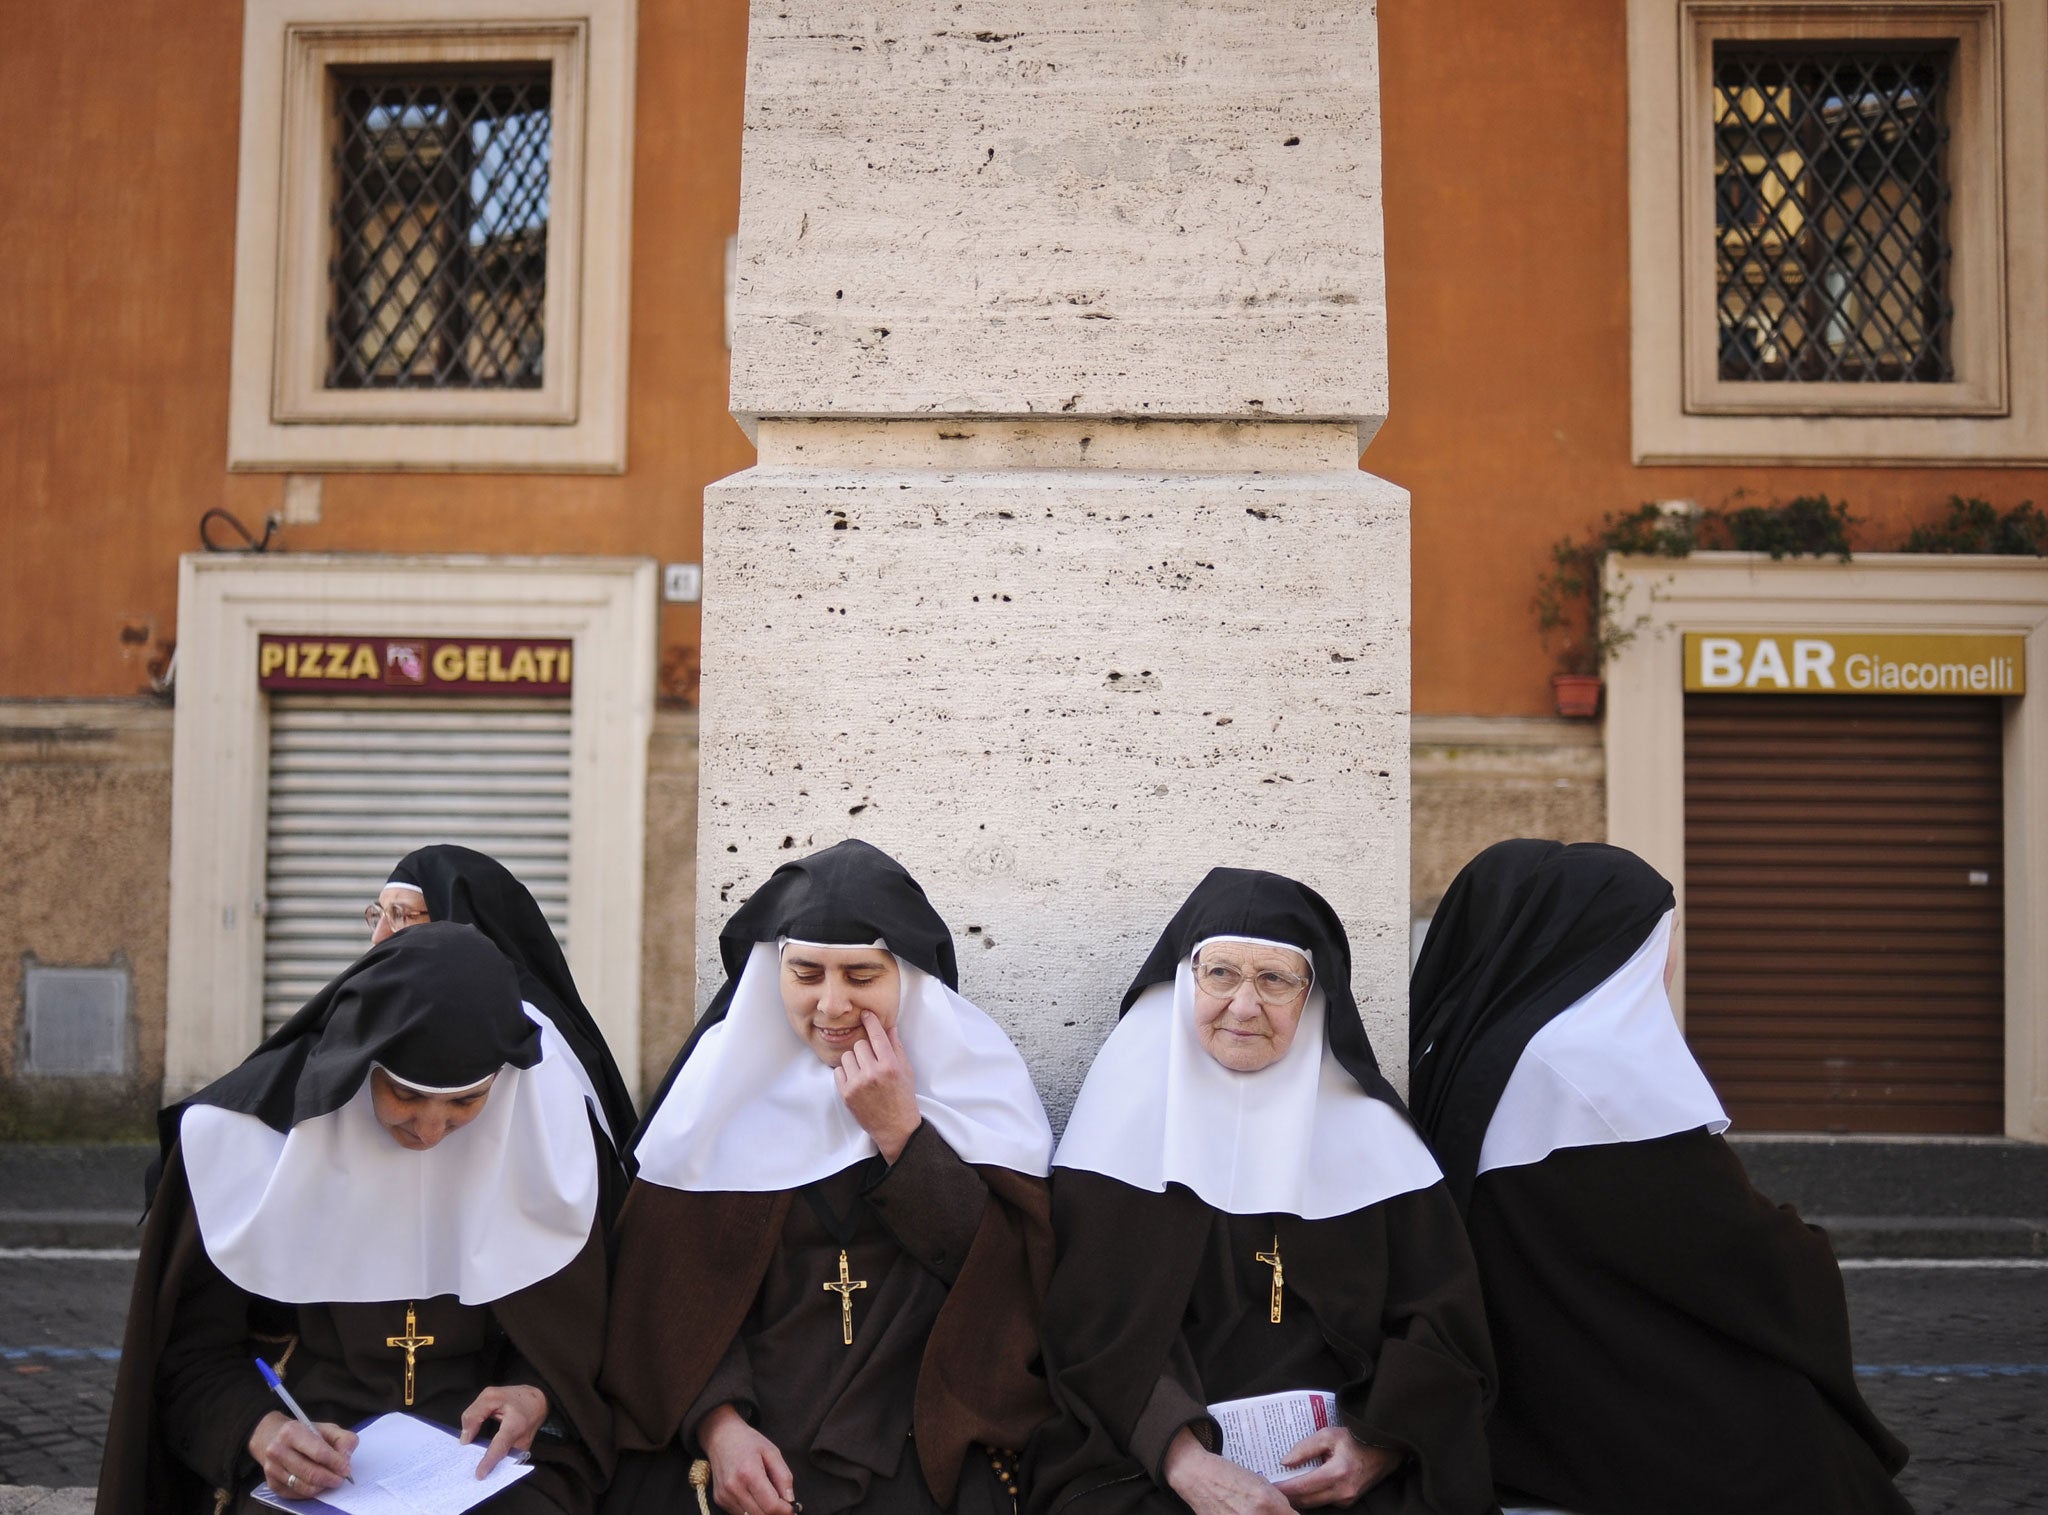 Nuns gather in St Peter's Square for Pope Francis I's inauguration mass in March 2013 